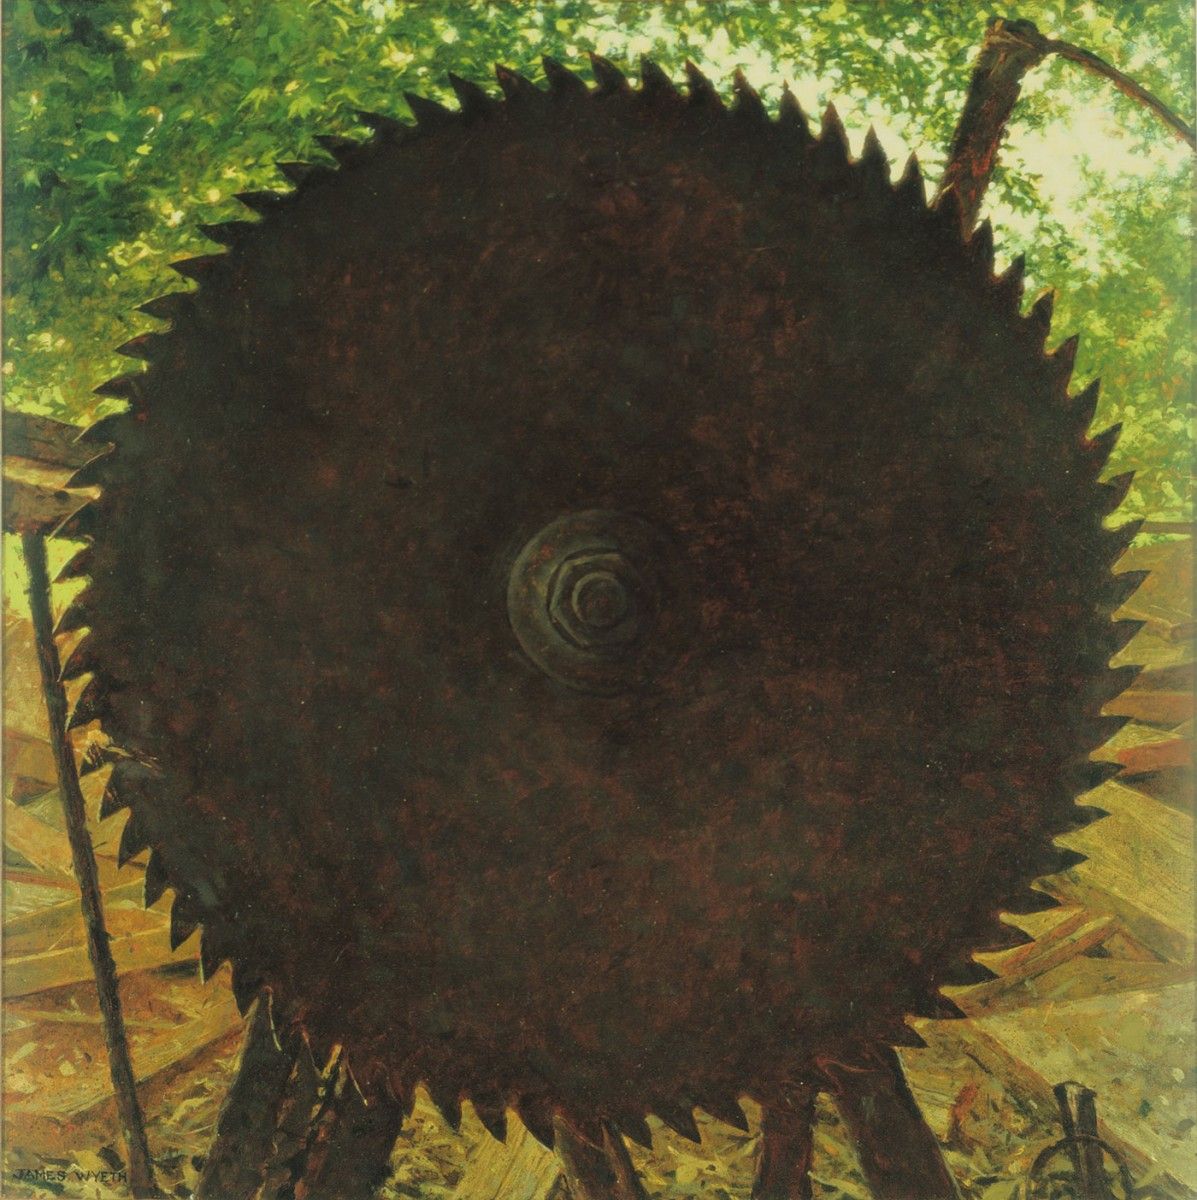 Jamie Wyeth (b. 1946), Buzz Saw, 1969, oil, 30 x 30 in. Private Collection